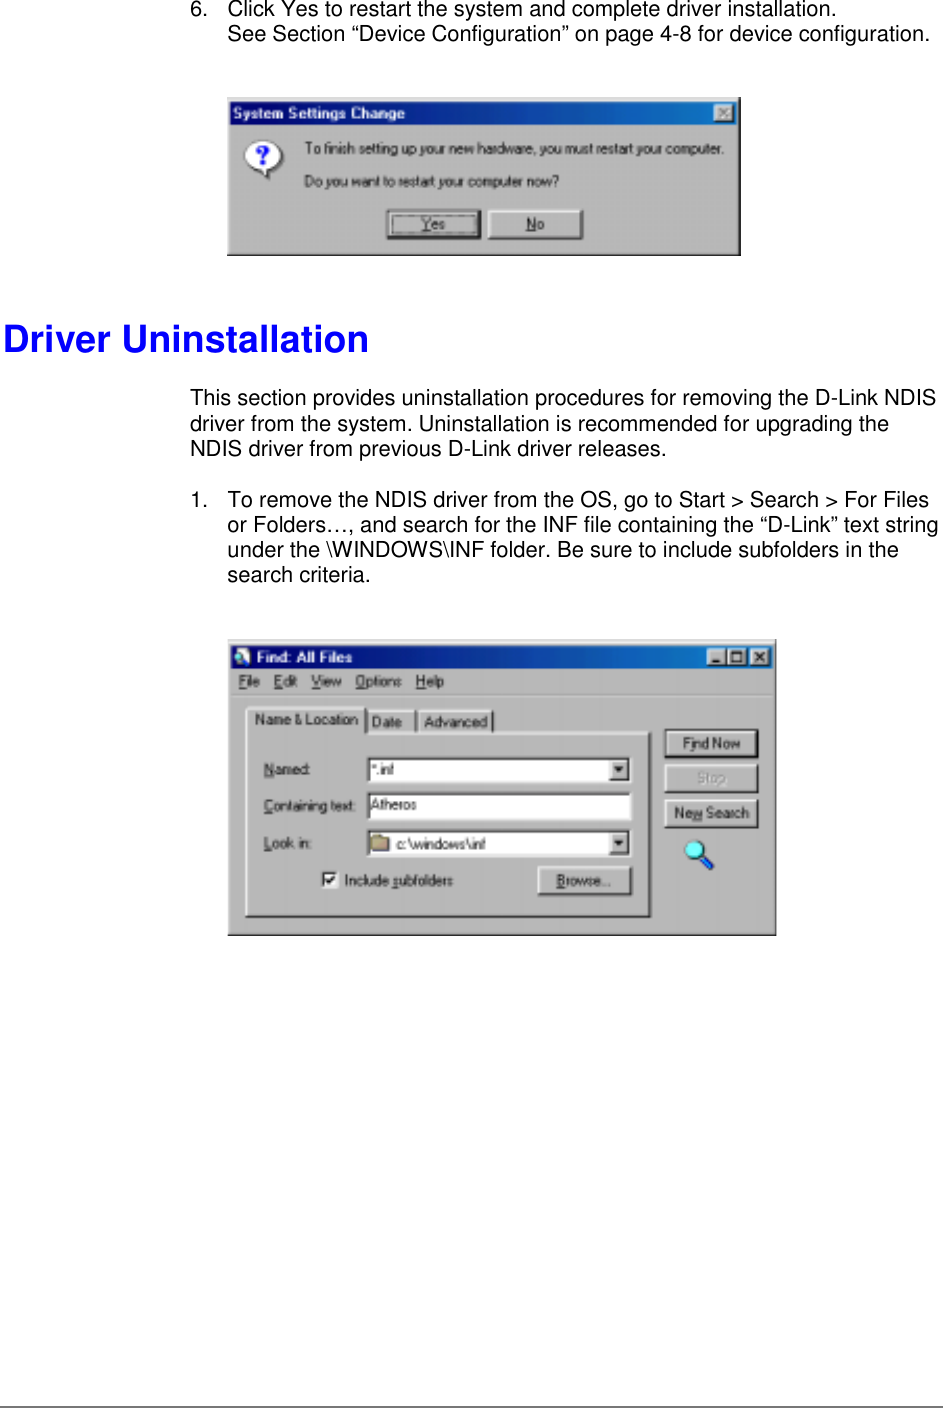 6.  Click Yes to restart the system and complete driver installation.See Section “Device Configuration” on page 4-8 for device configuration.Driver UninstallationThis section provides uninstallation procedures for removing the D-Link NDISdriver from the system. Uninstallation is recommended for upgrading theNDIS driver from previous D-Link driver releases.1.  To remove the NDIS driver from the OS, go to Start &gt; Search &gt; For Filesor Folders…, and search for the INF file containing the “D-Link” text stringunder the \WINDOWS\INF folder. Be sure to include subfolders in thesearch criteria.